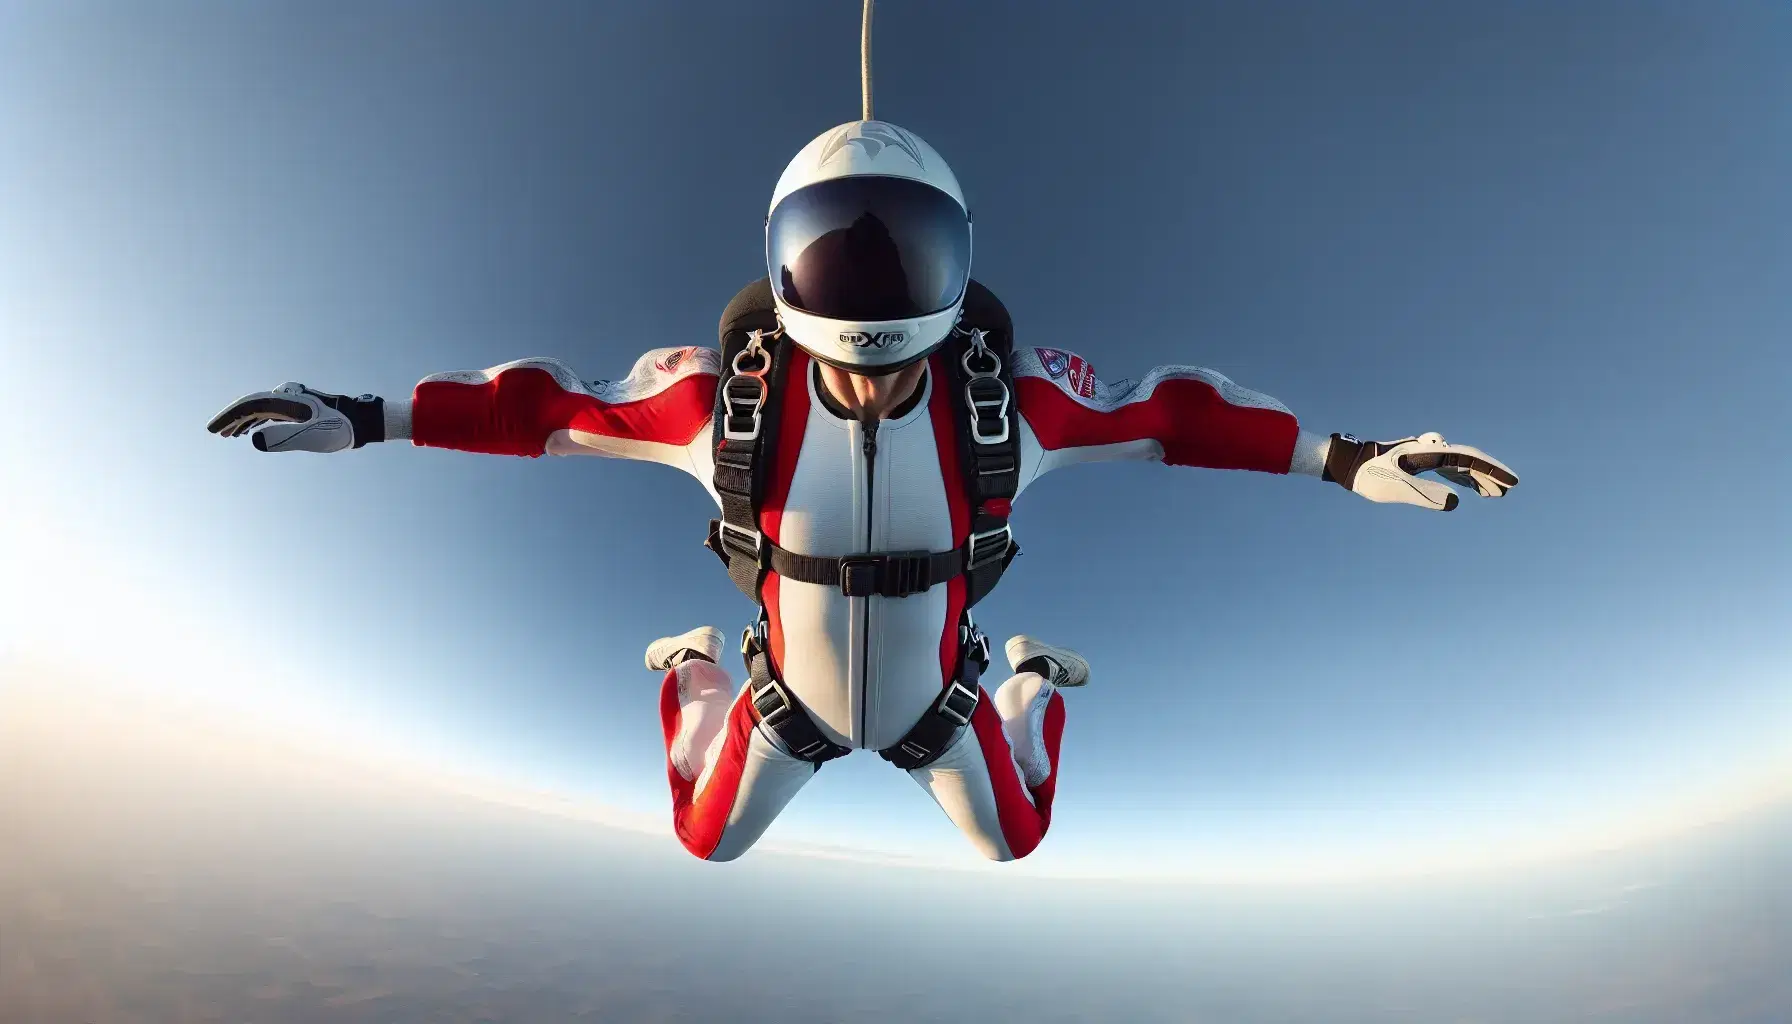 Skydiver in red and white jumpsuit free-falling against a clear blue sky, with arms extended and parachute unopened, highlighting the thrill of skydiving.